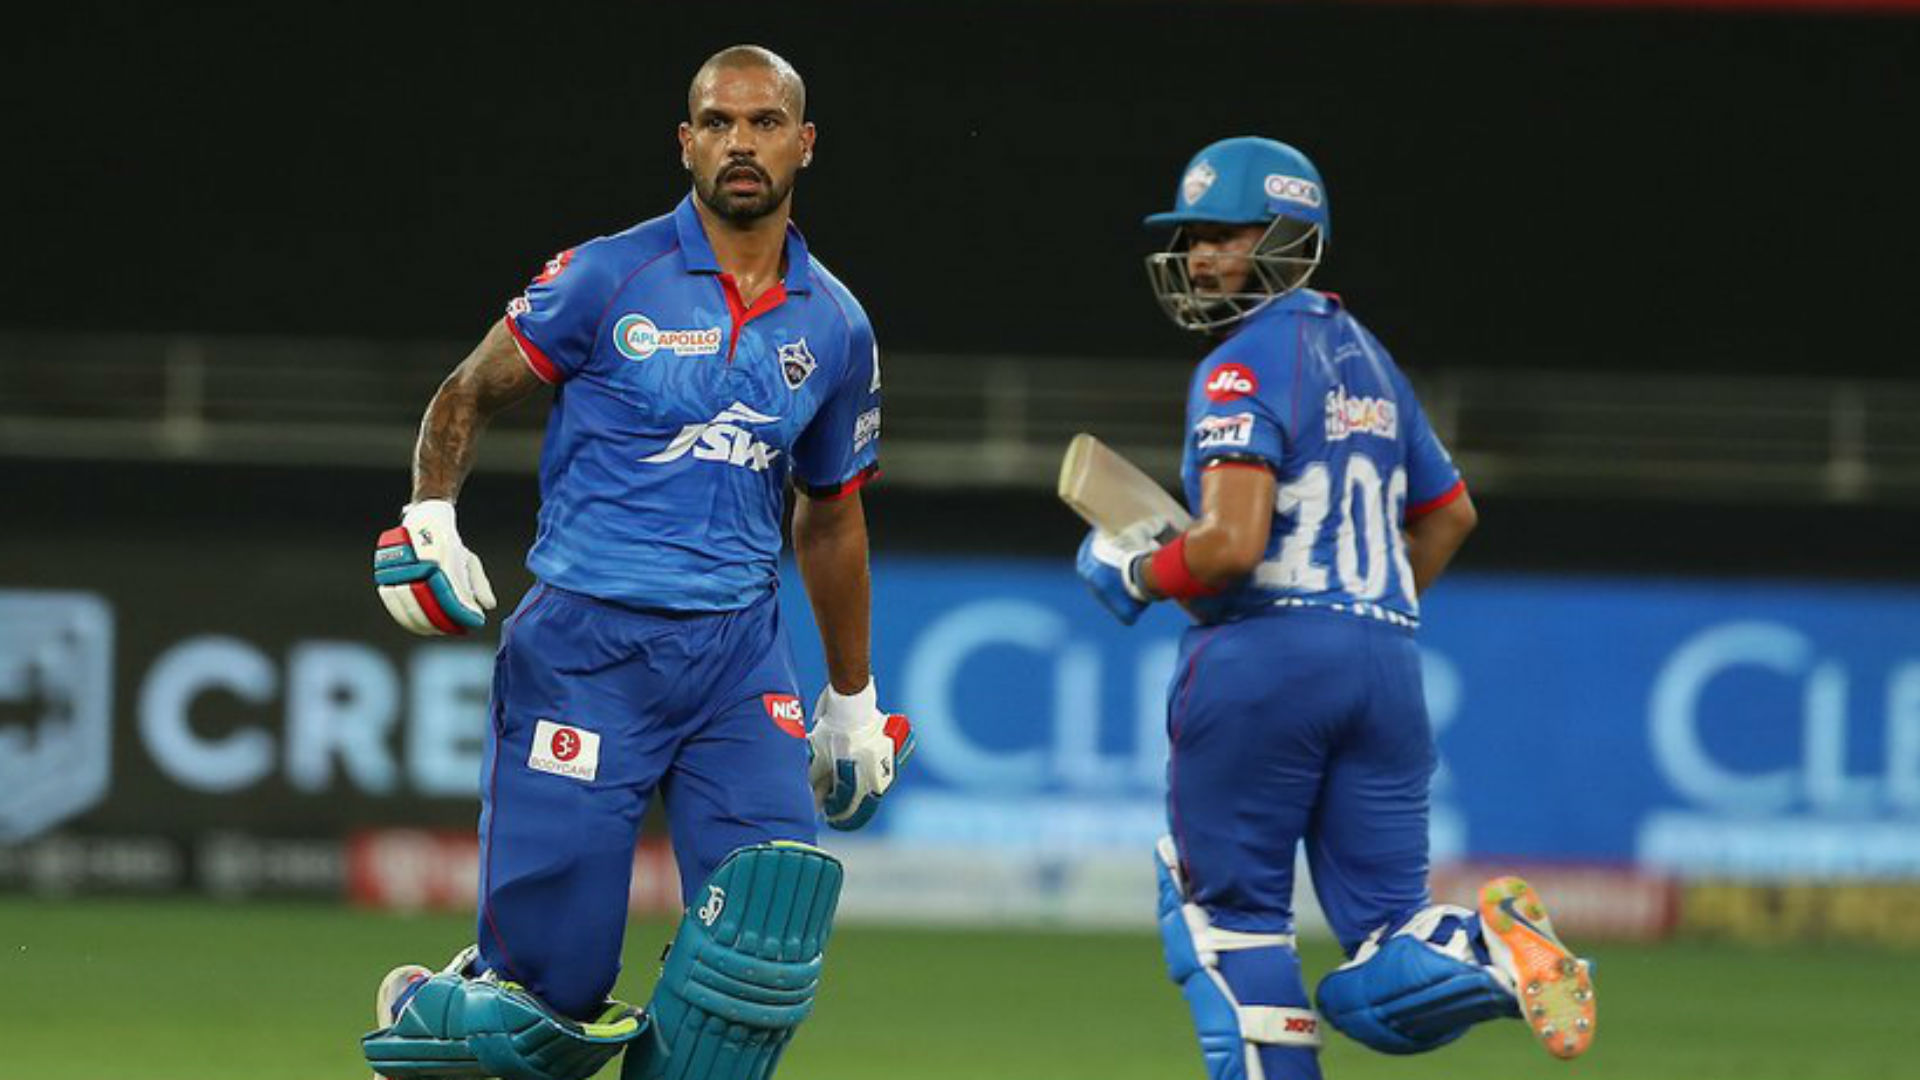 Prithvi Shaw smashed a brilliant half-century and Kagiso Rabada took three wickets as Delhi Capitals made it two wins out of two.